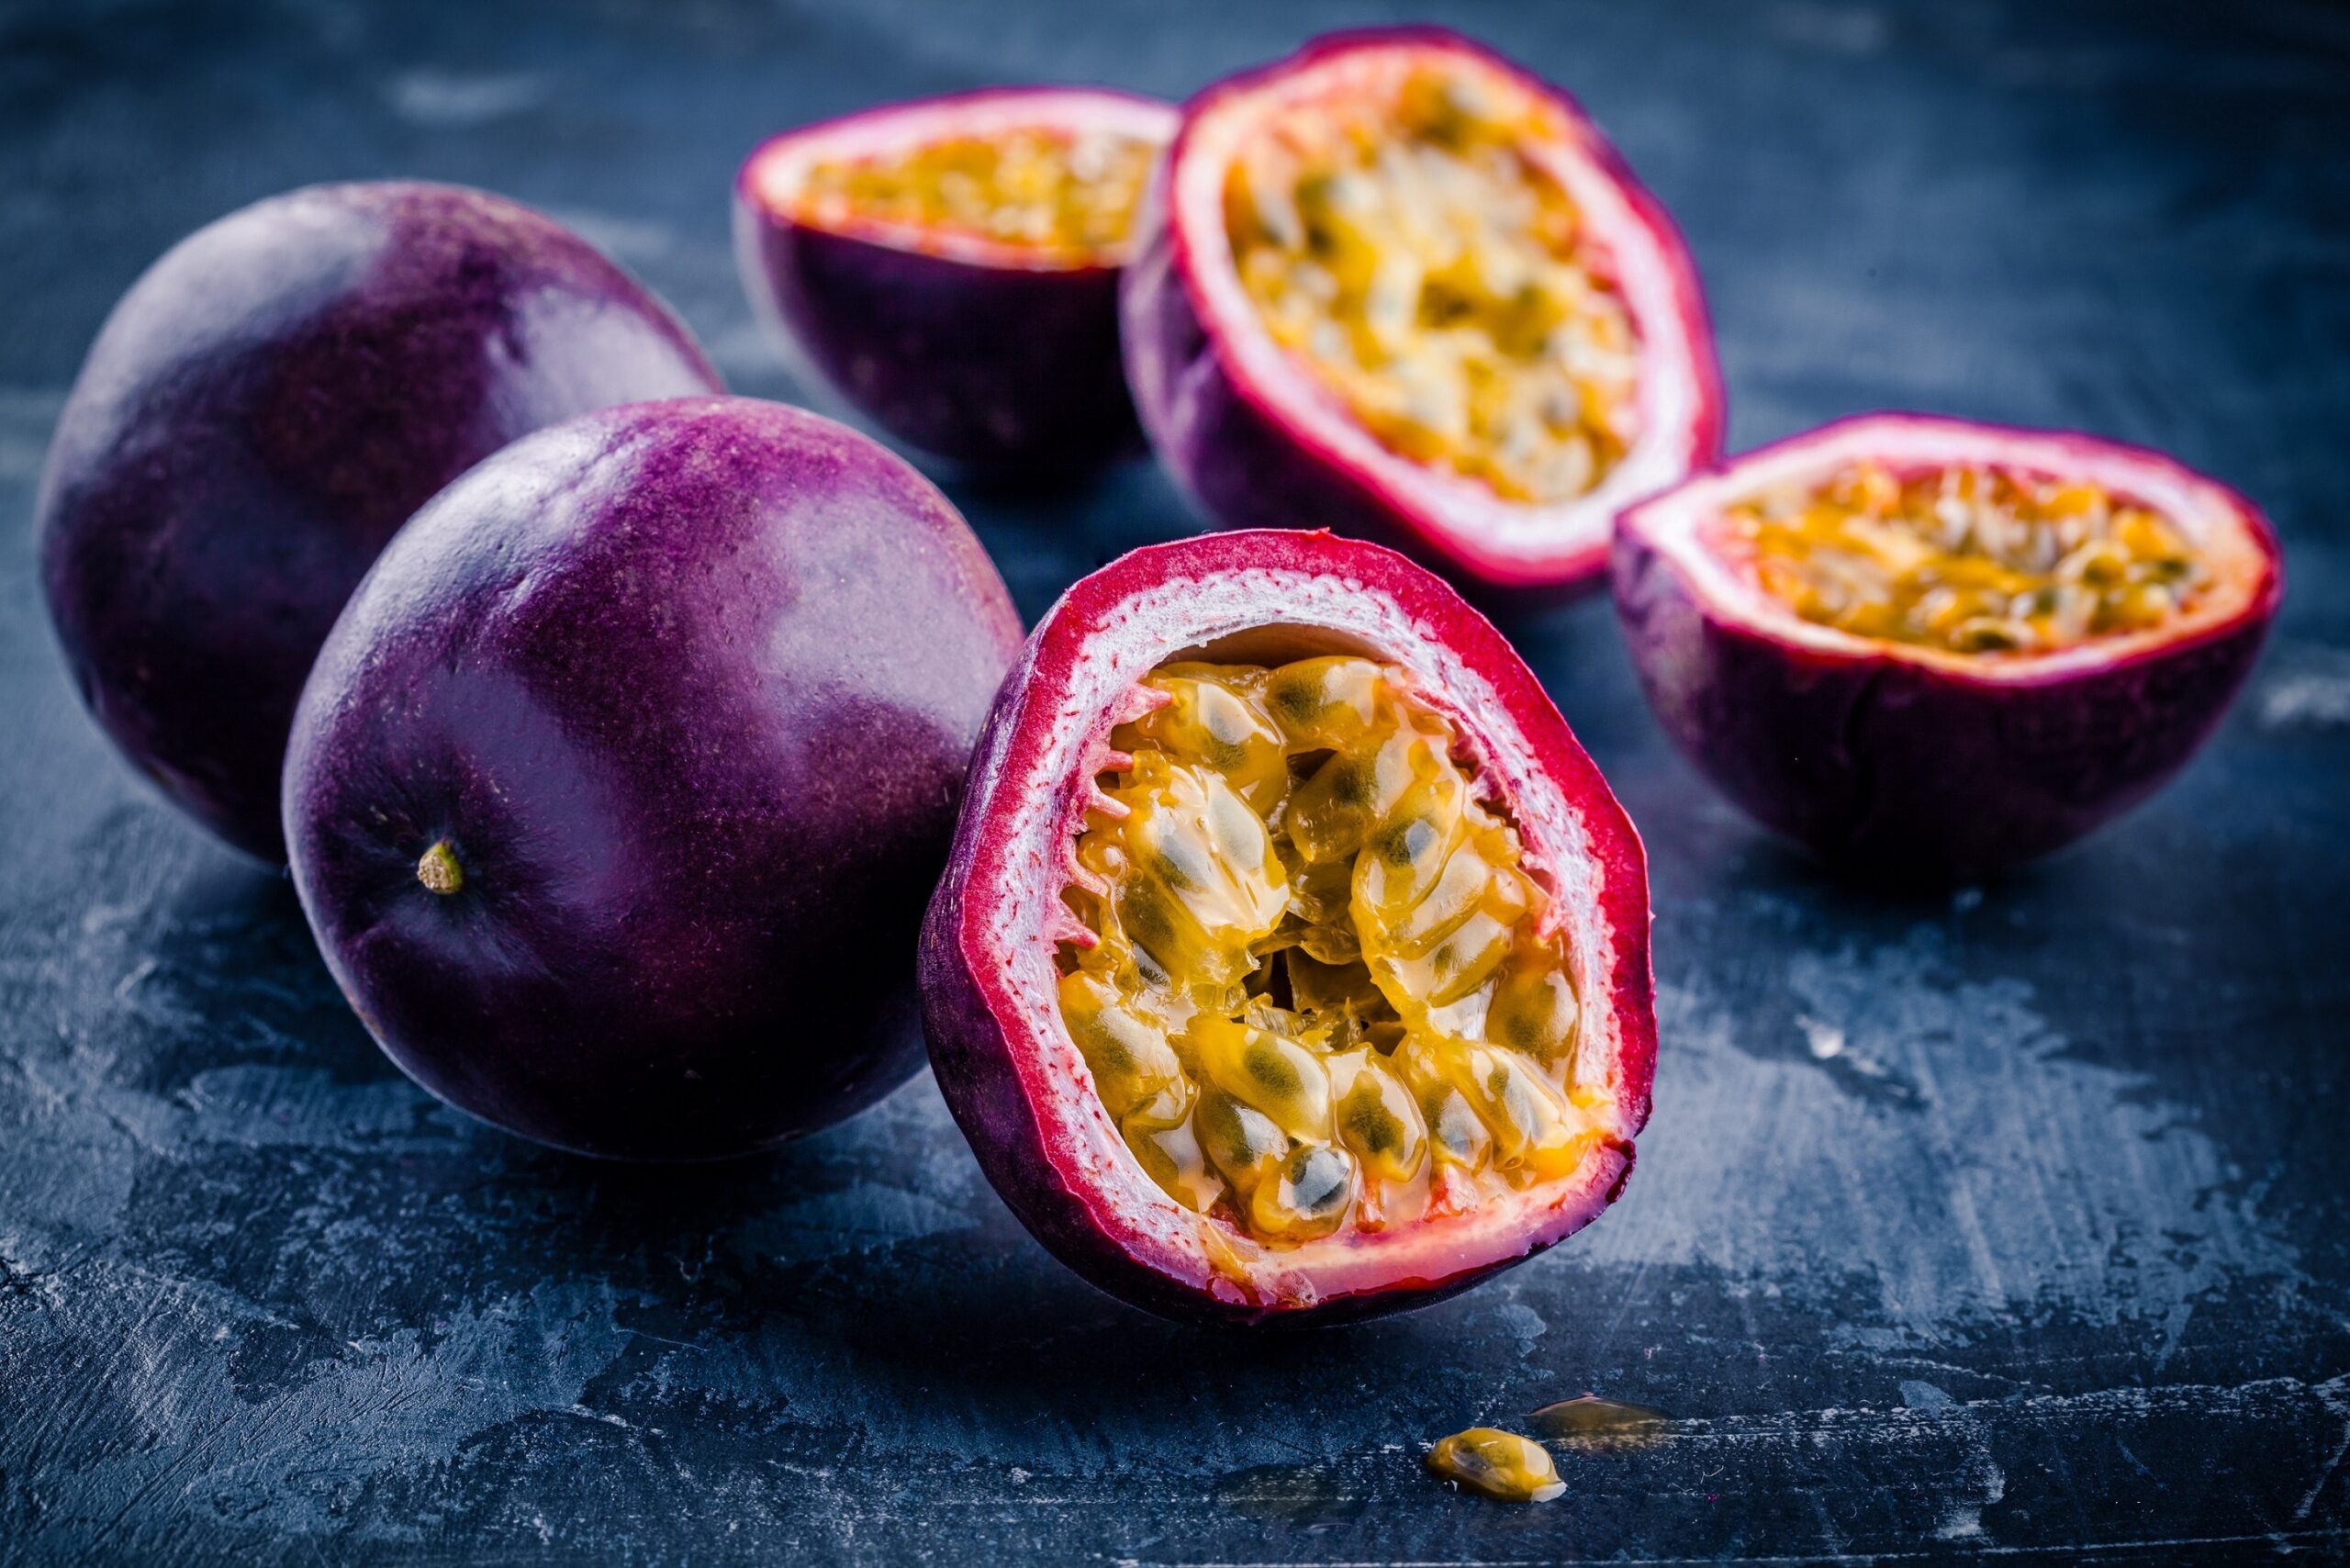 Passion fruit lowers blood sugar in diabetes and protects against cardiovascular diseases